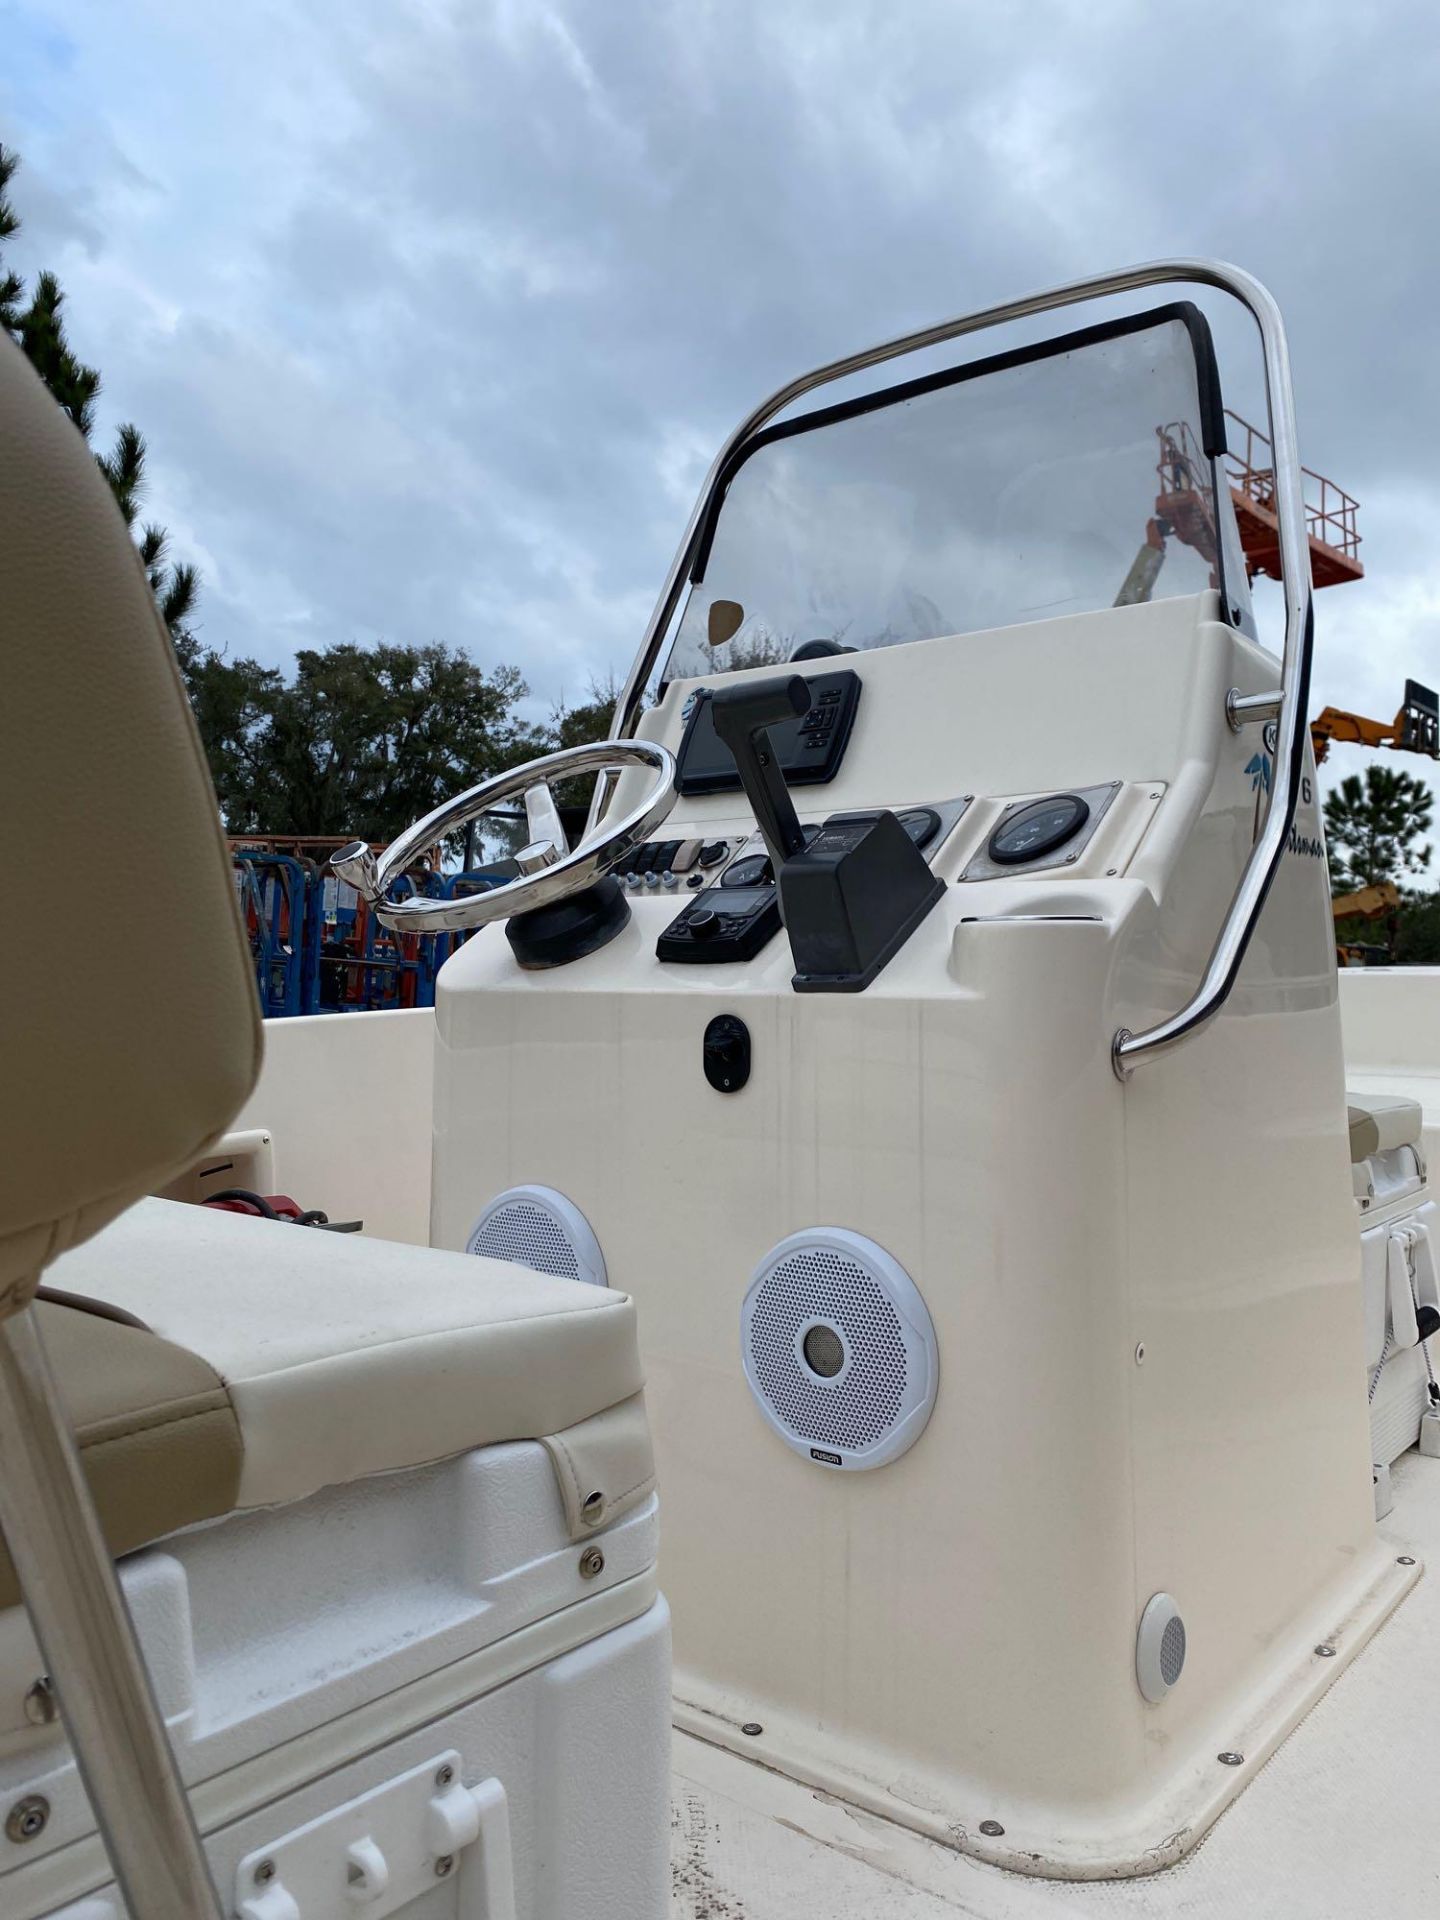 KEY WEST CENTER CONSOLE, TRAILER, RADIO, 4 STROKE 115HP, RUNS AND OPERATES - Image 13 of 21